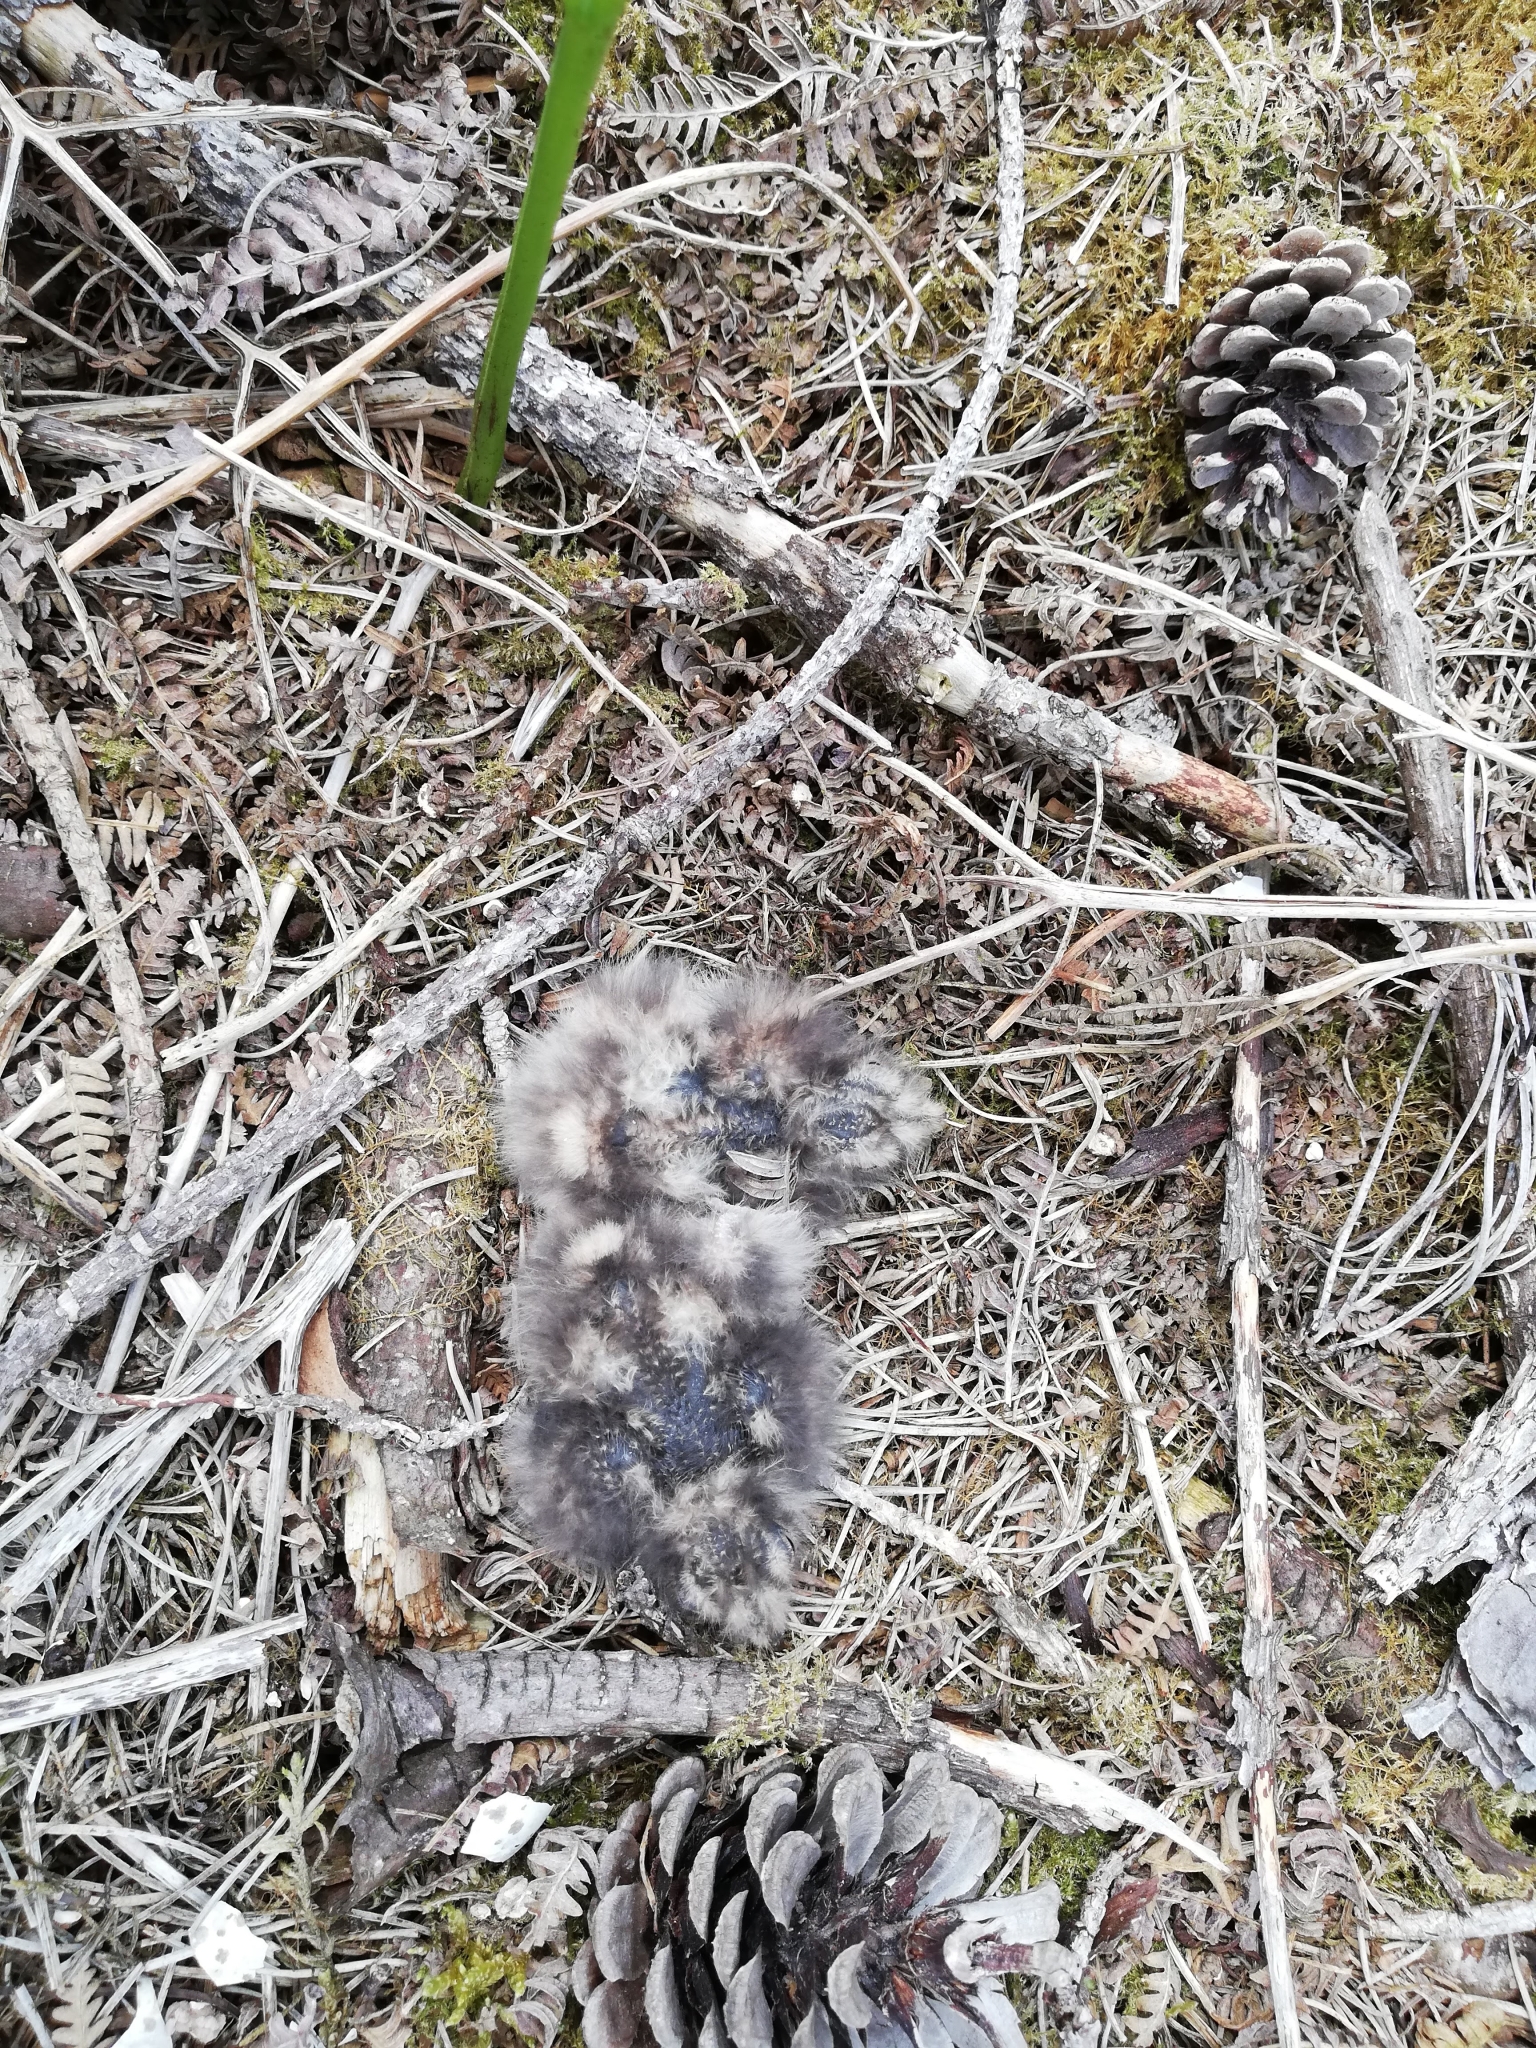 A photo from the FoTF Conservation Event - June 2019 - Nightjar Nest Hunt with members of the BTO - British Trust for Ornithology : A Nightjar nest, with baby Nightjars